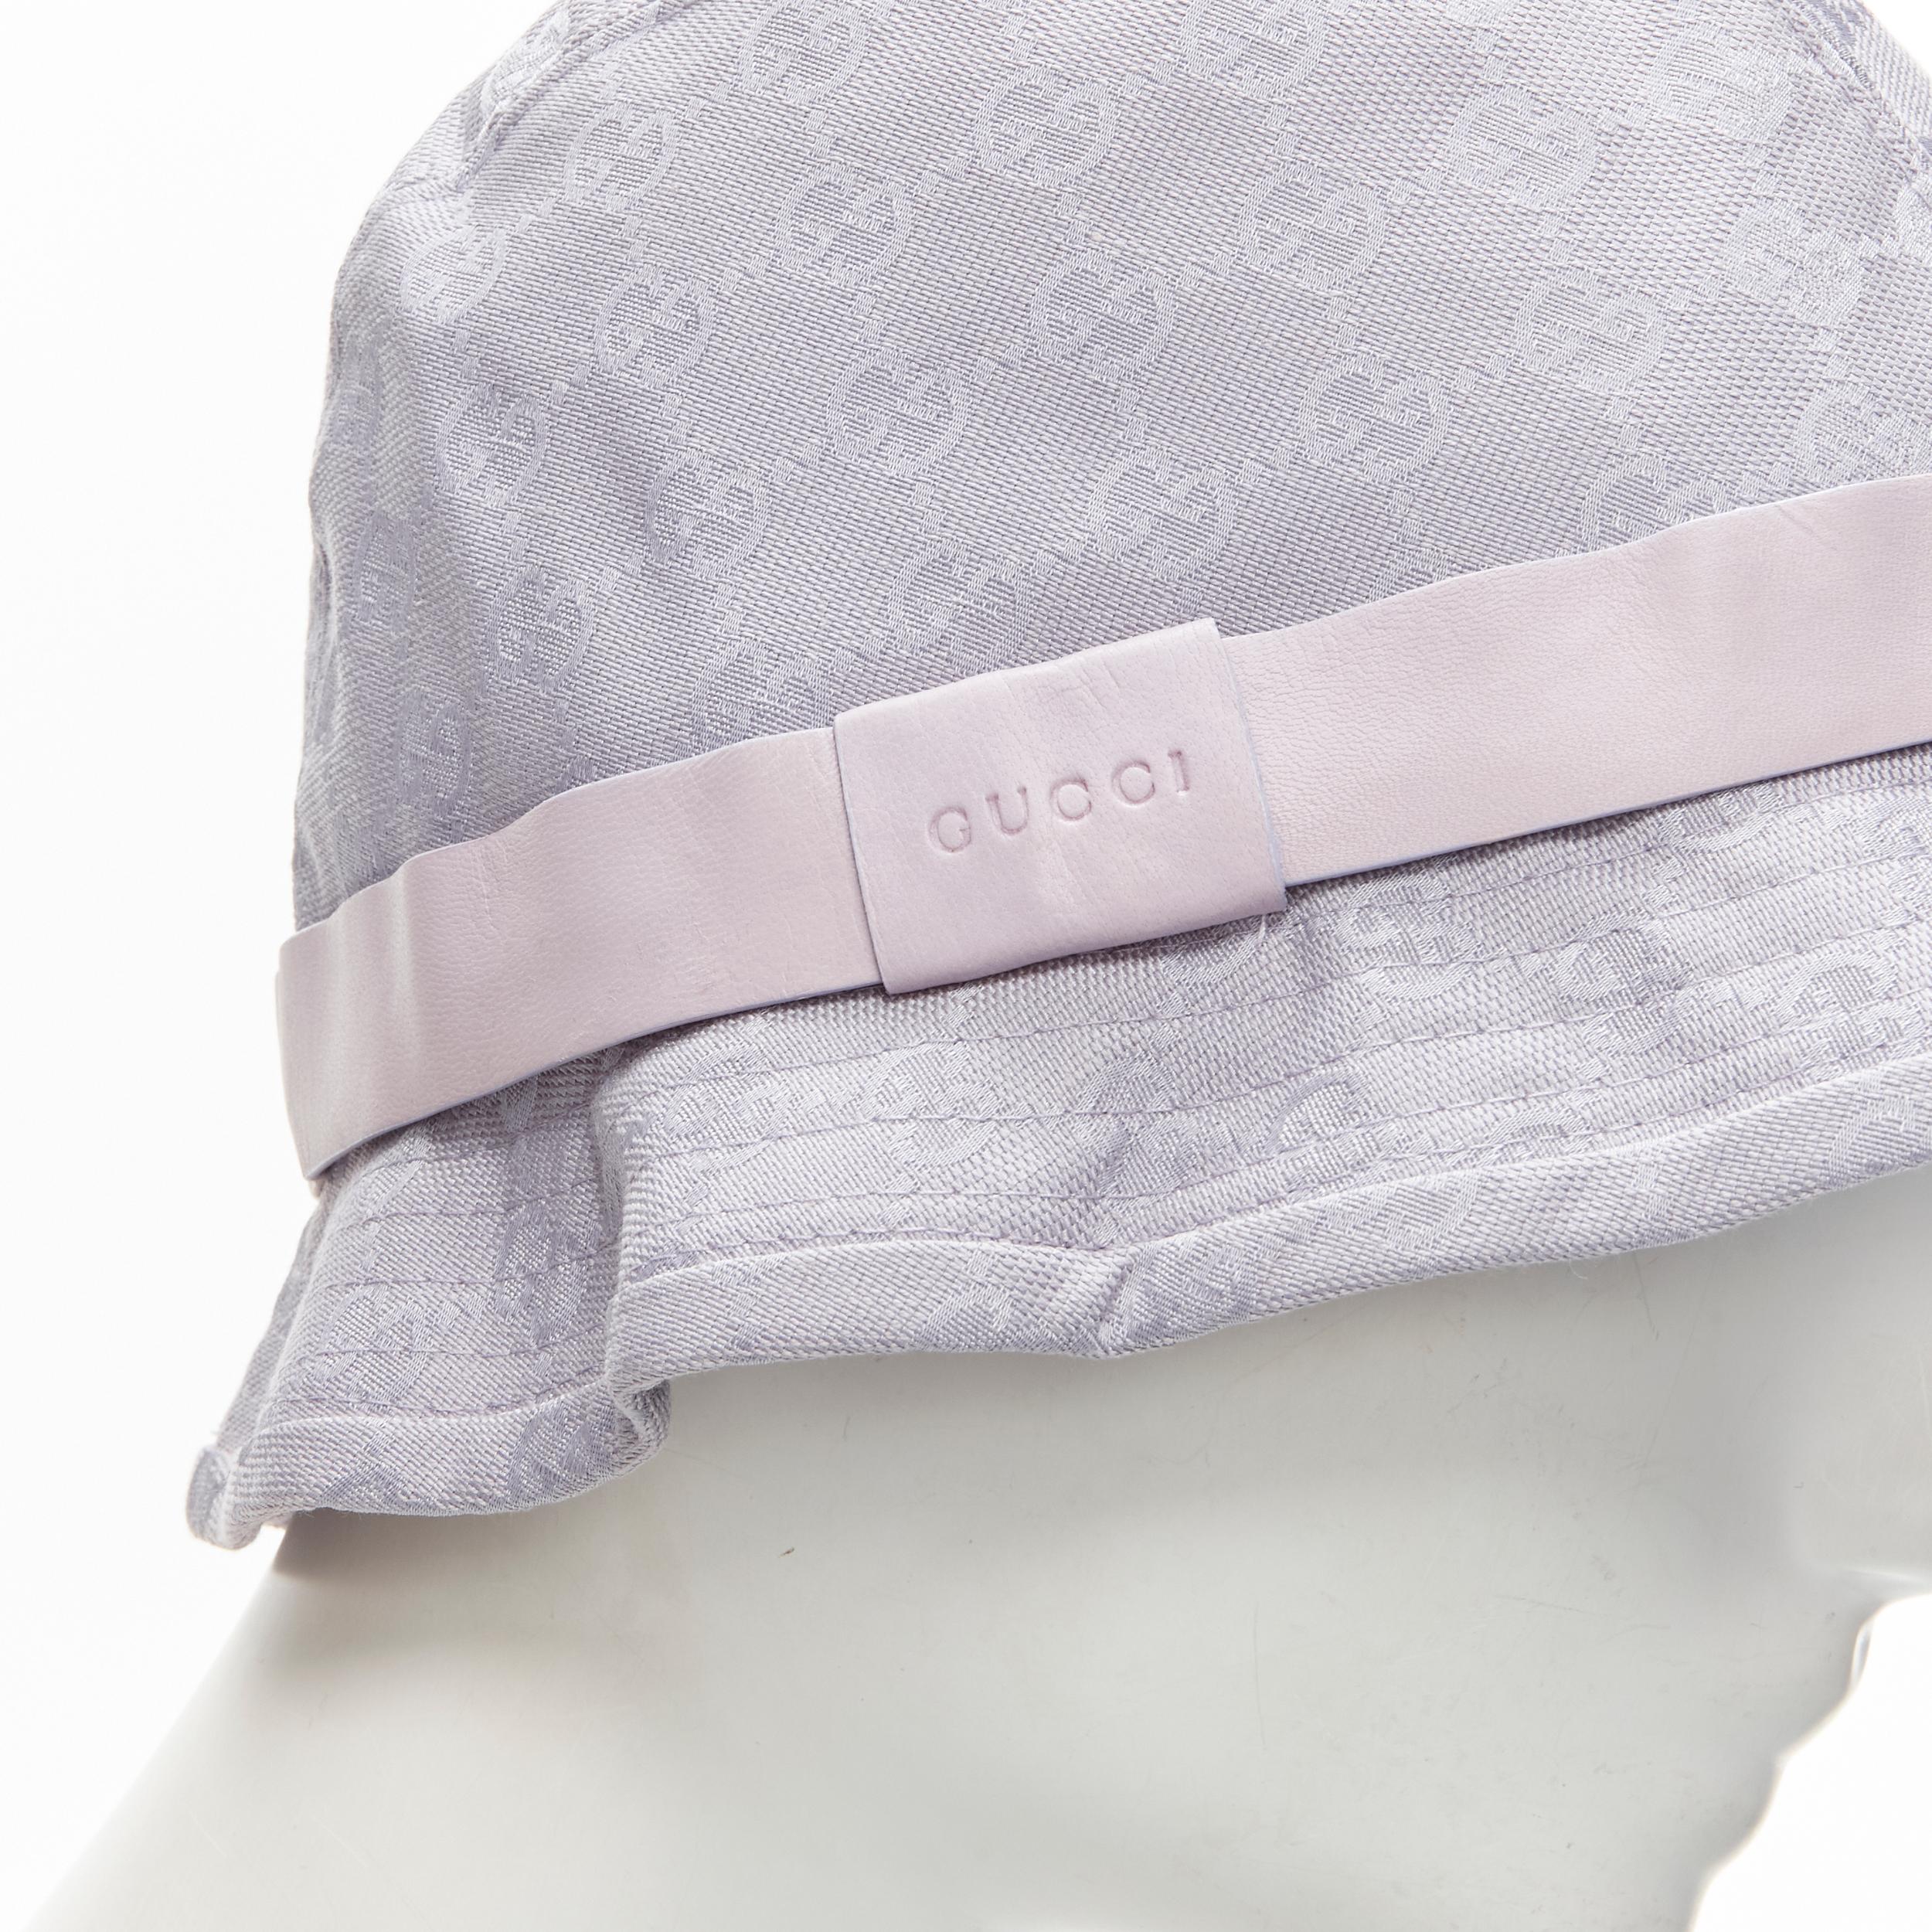 rare GUCCI Vintage lilac purple GG monogram leather trim fisherman bucket hat A
Brand: Gucci
Material: Canvas
Color: Purple
Pattern: Solid
Extra Detail: Gucci embossed leather trim.
Made in: Italy

CONDITION:
Condition: Very good, this item was